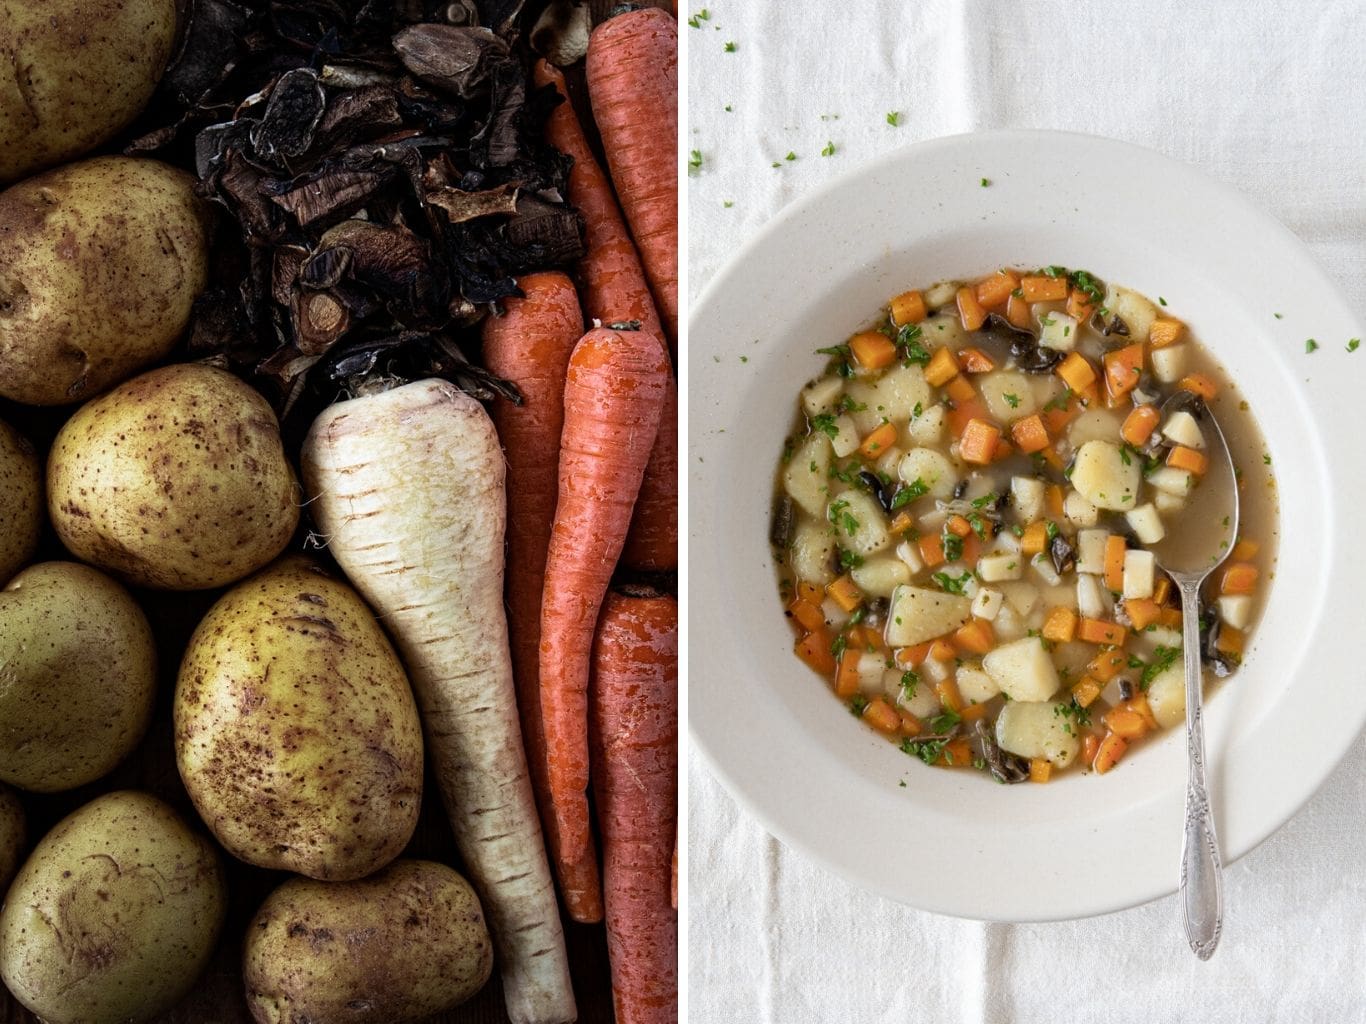 Photo dyptich. Left photo showing ingredients for chunky Czech Potato Soup (Bramboračka) including potatoes, dried porcini, carrots and parsnip. On the right is a plate with the finished soup.